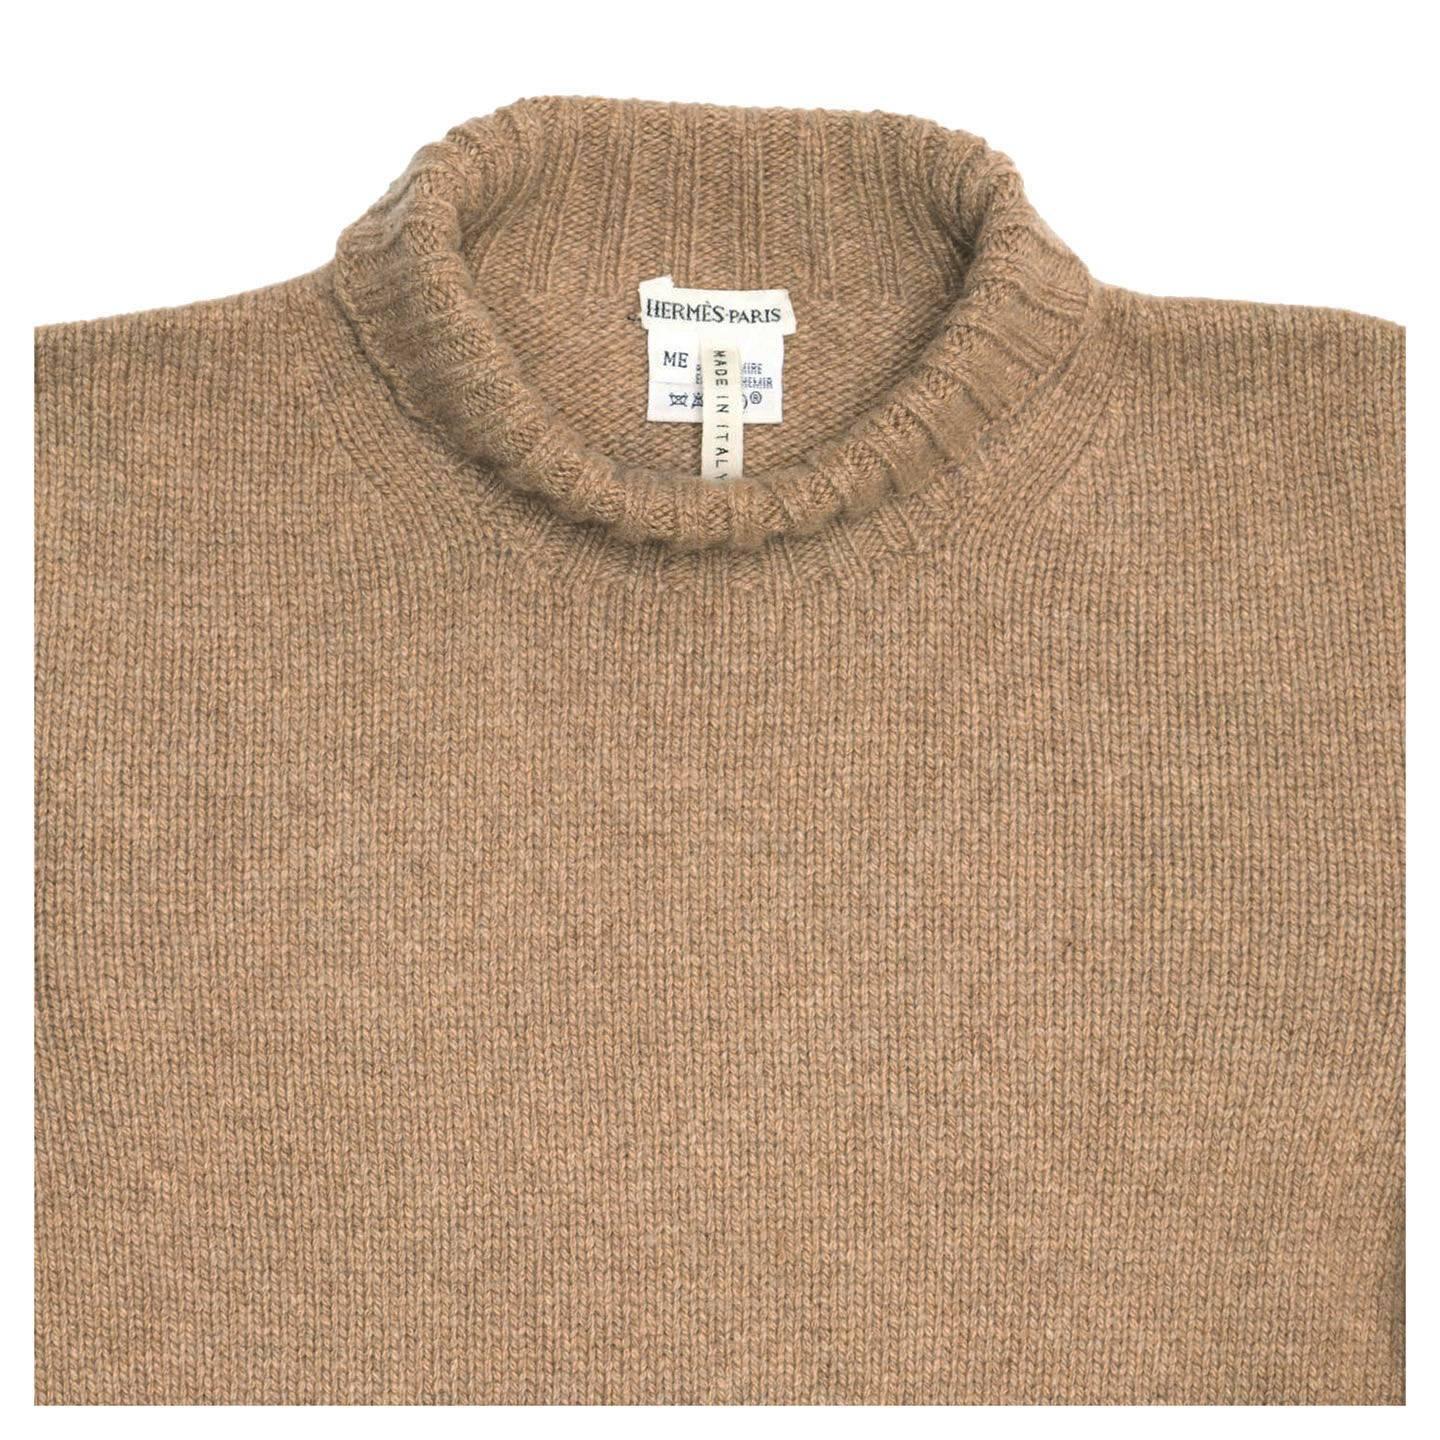 Hermès Camel Cashmere Sweater In Excellent Condition For Sale In Brooklyn, NY